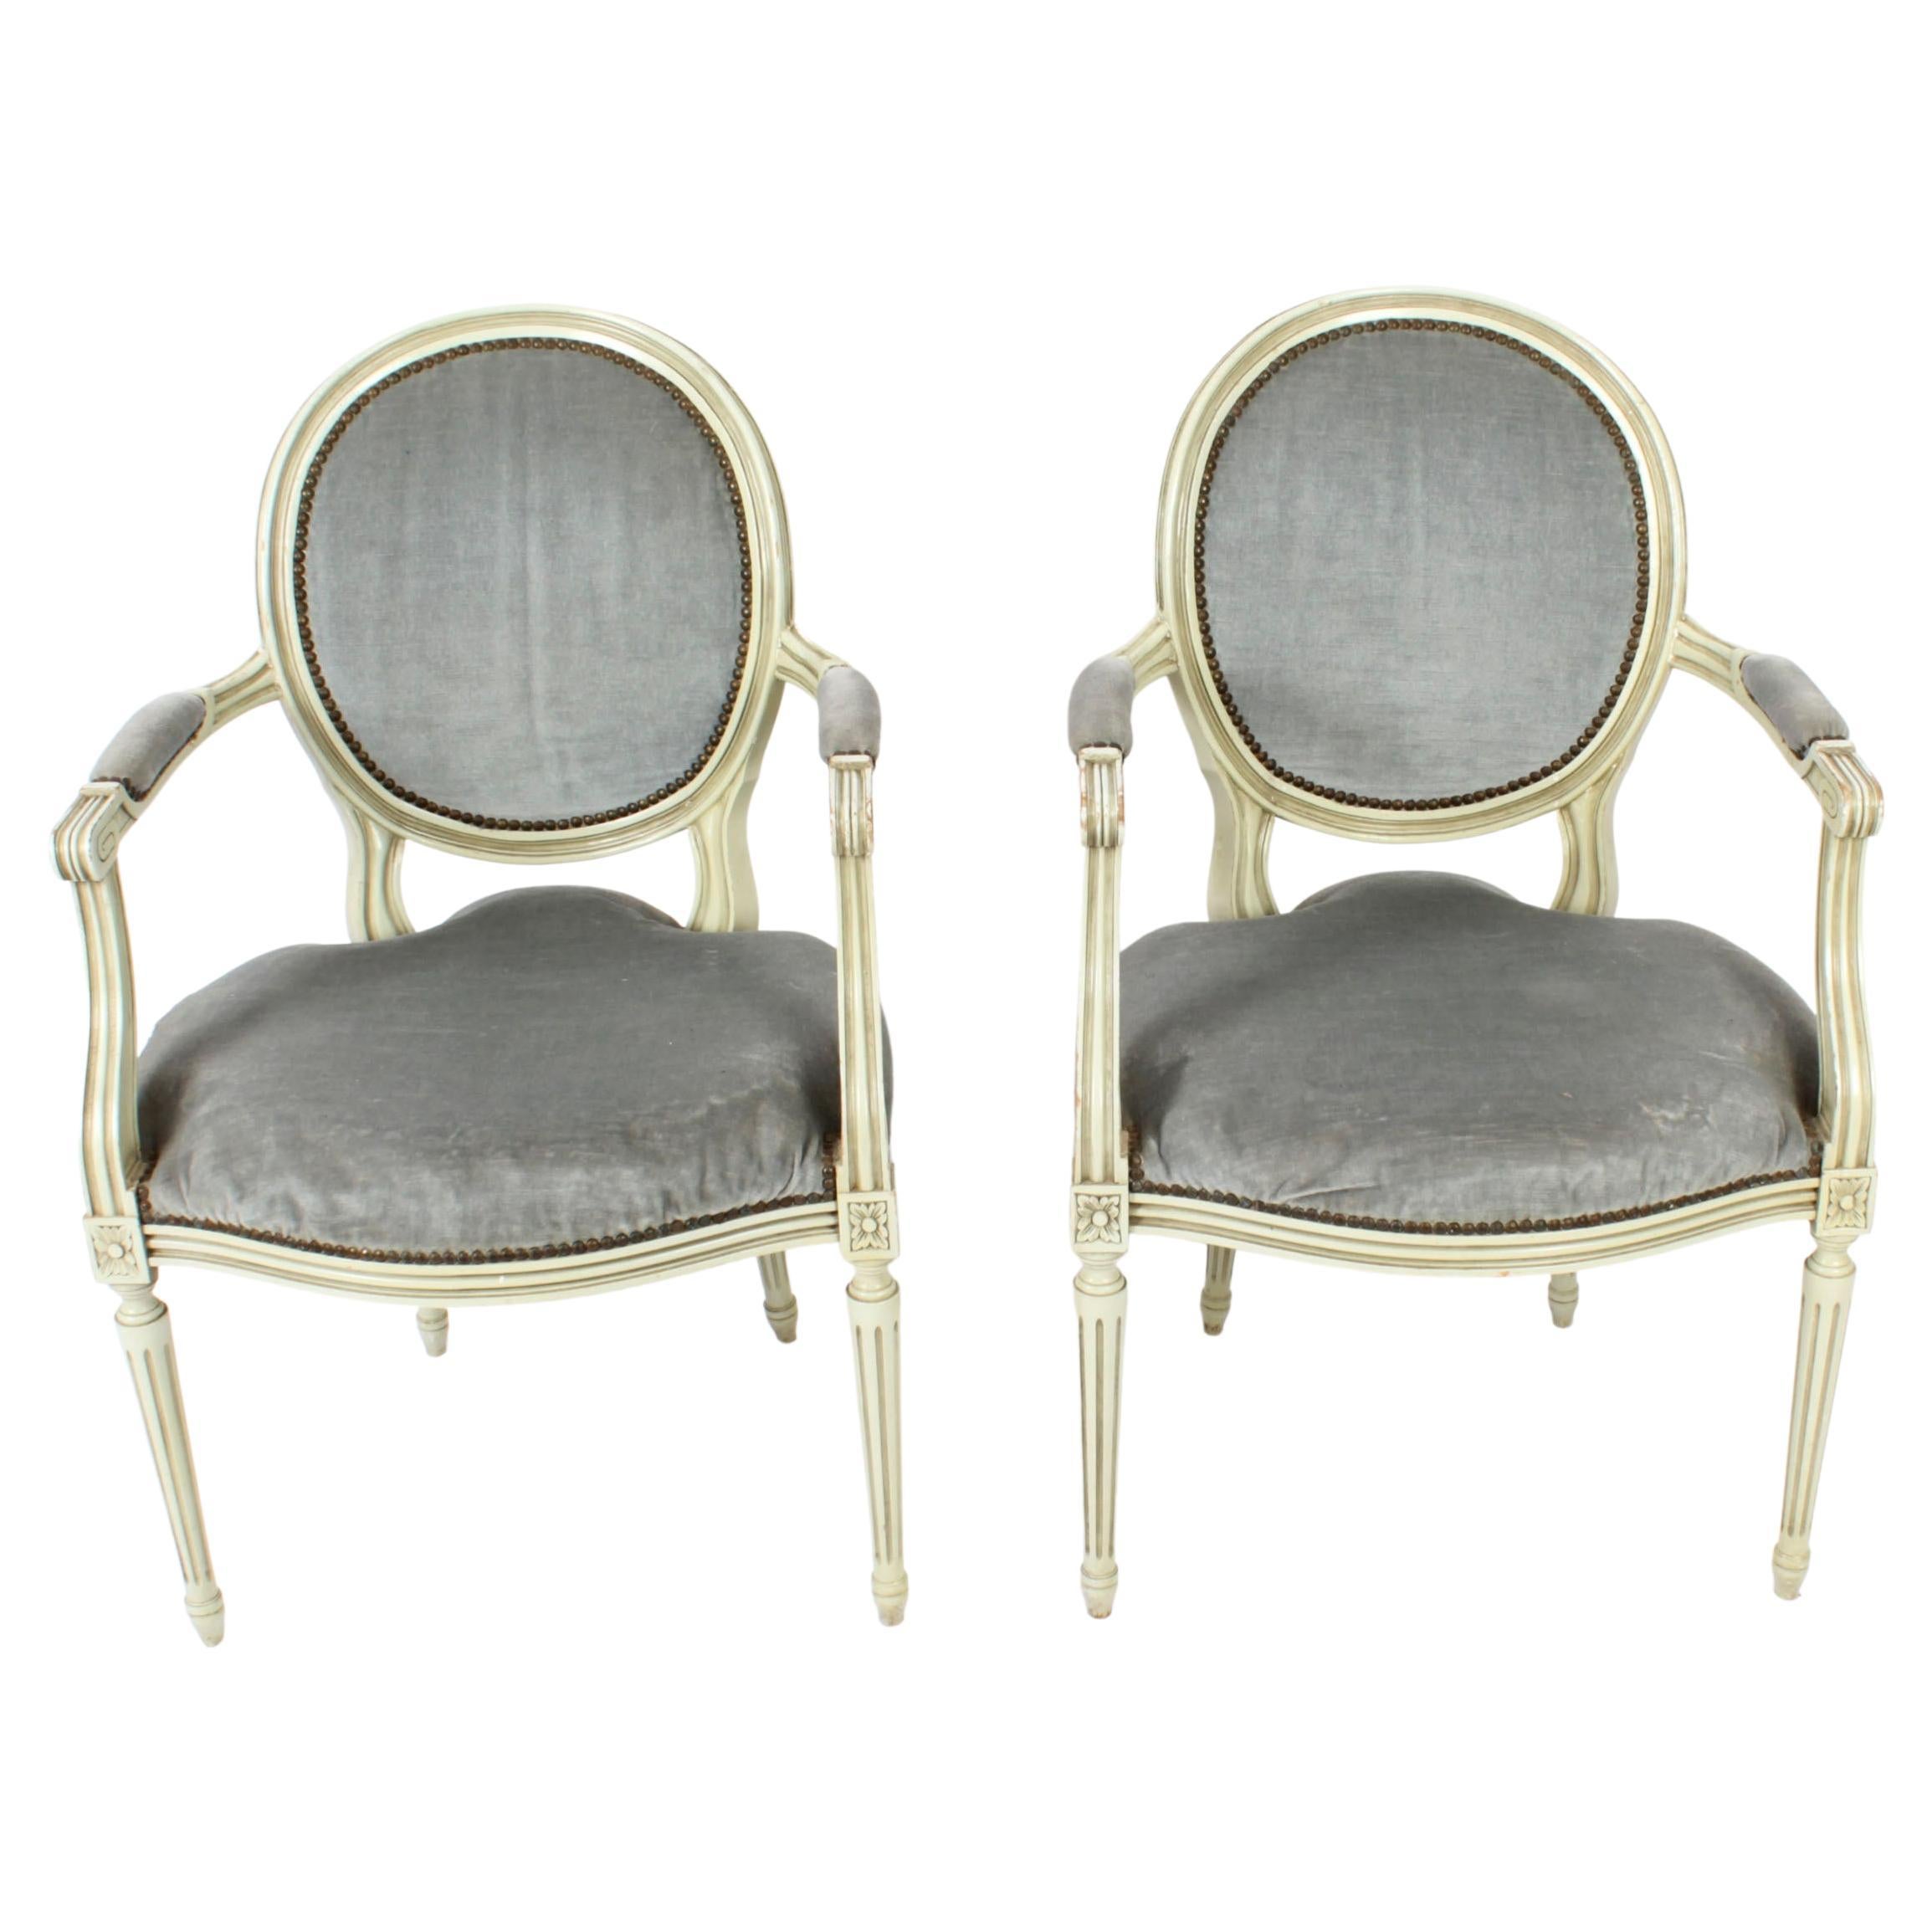 Antique Pair French Louis XVI Revival Painted Armchairs, Early 20th Century For Sale